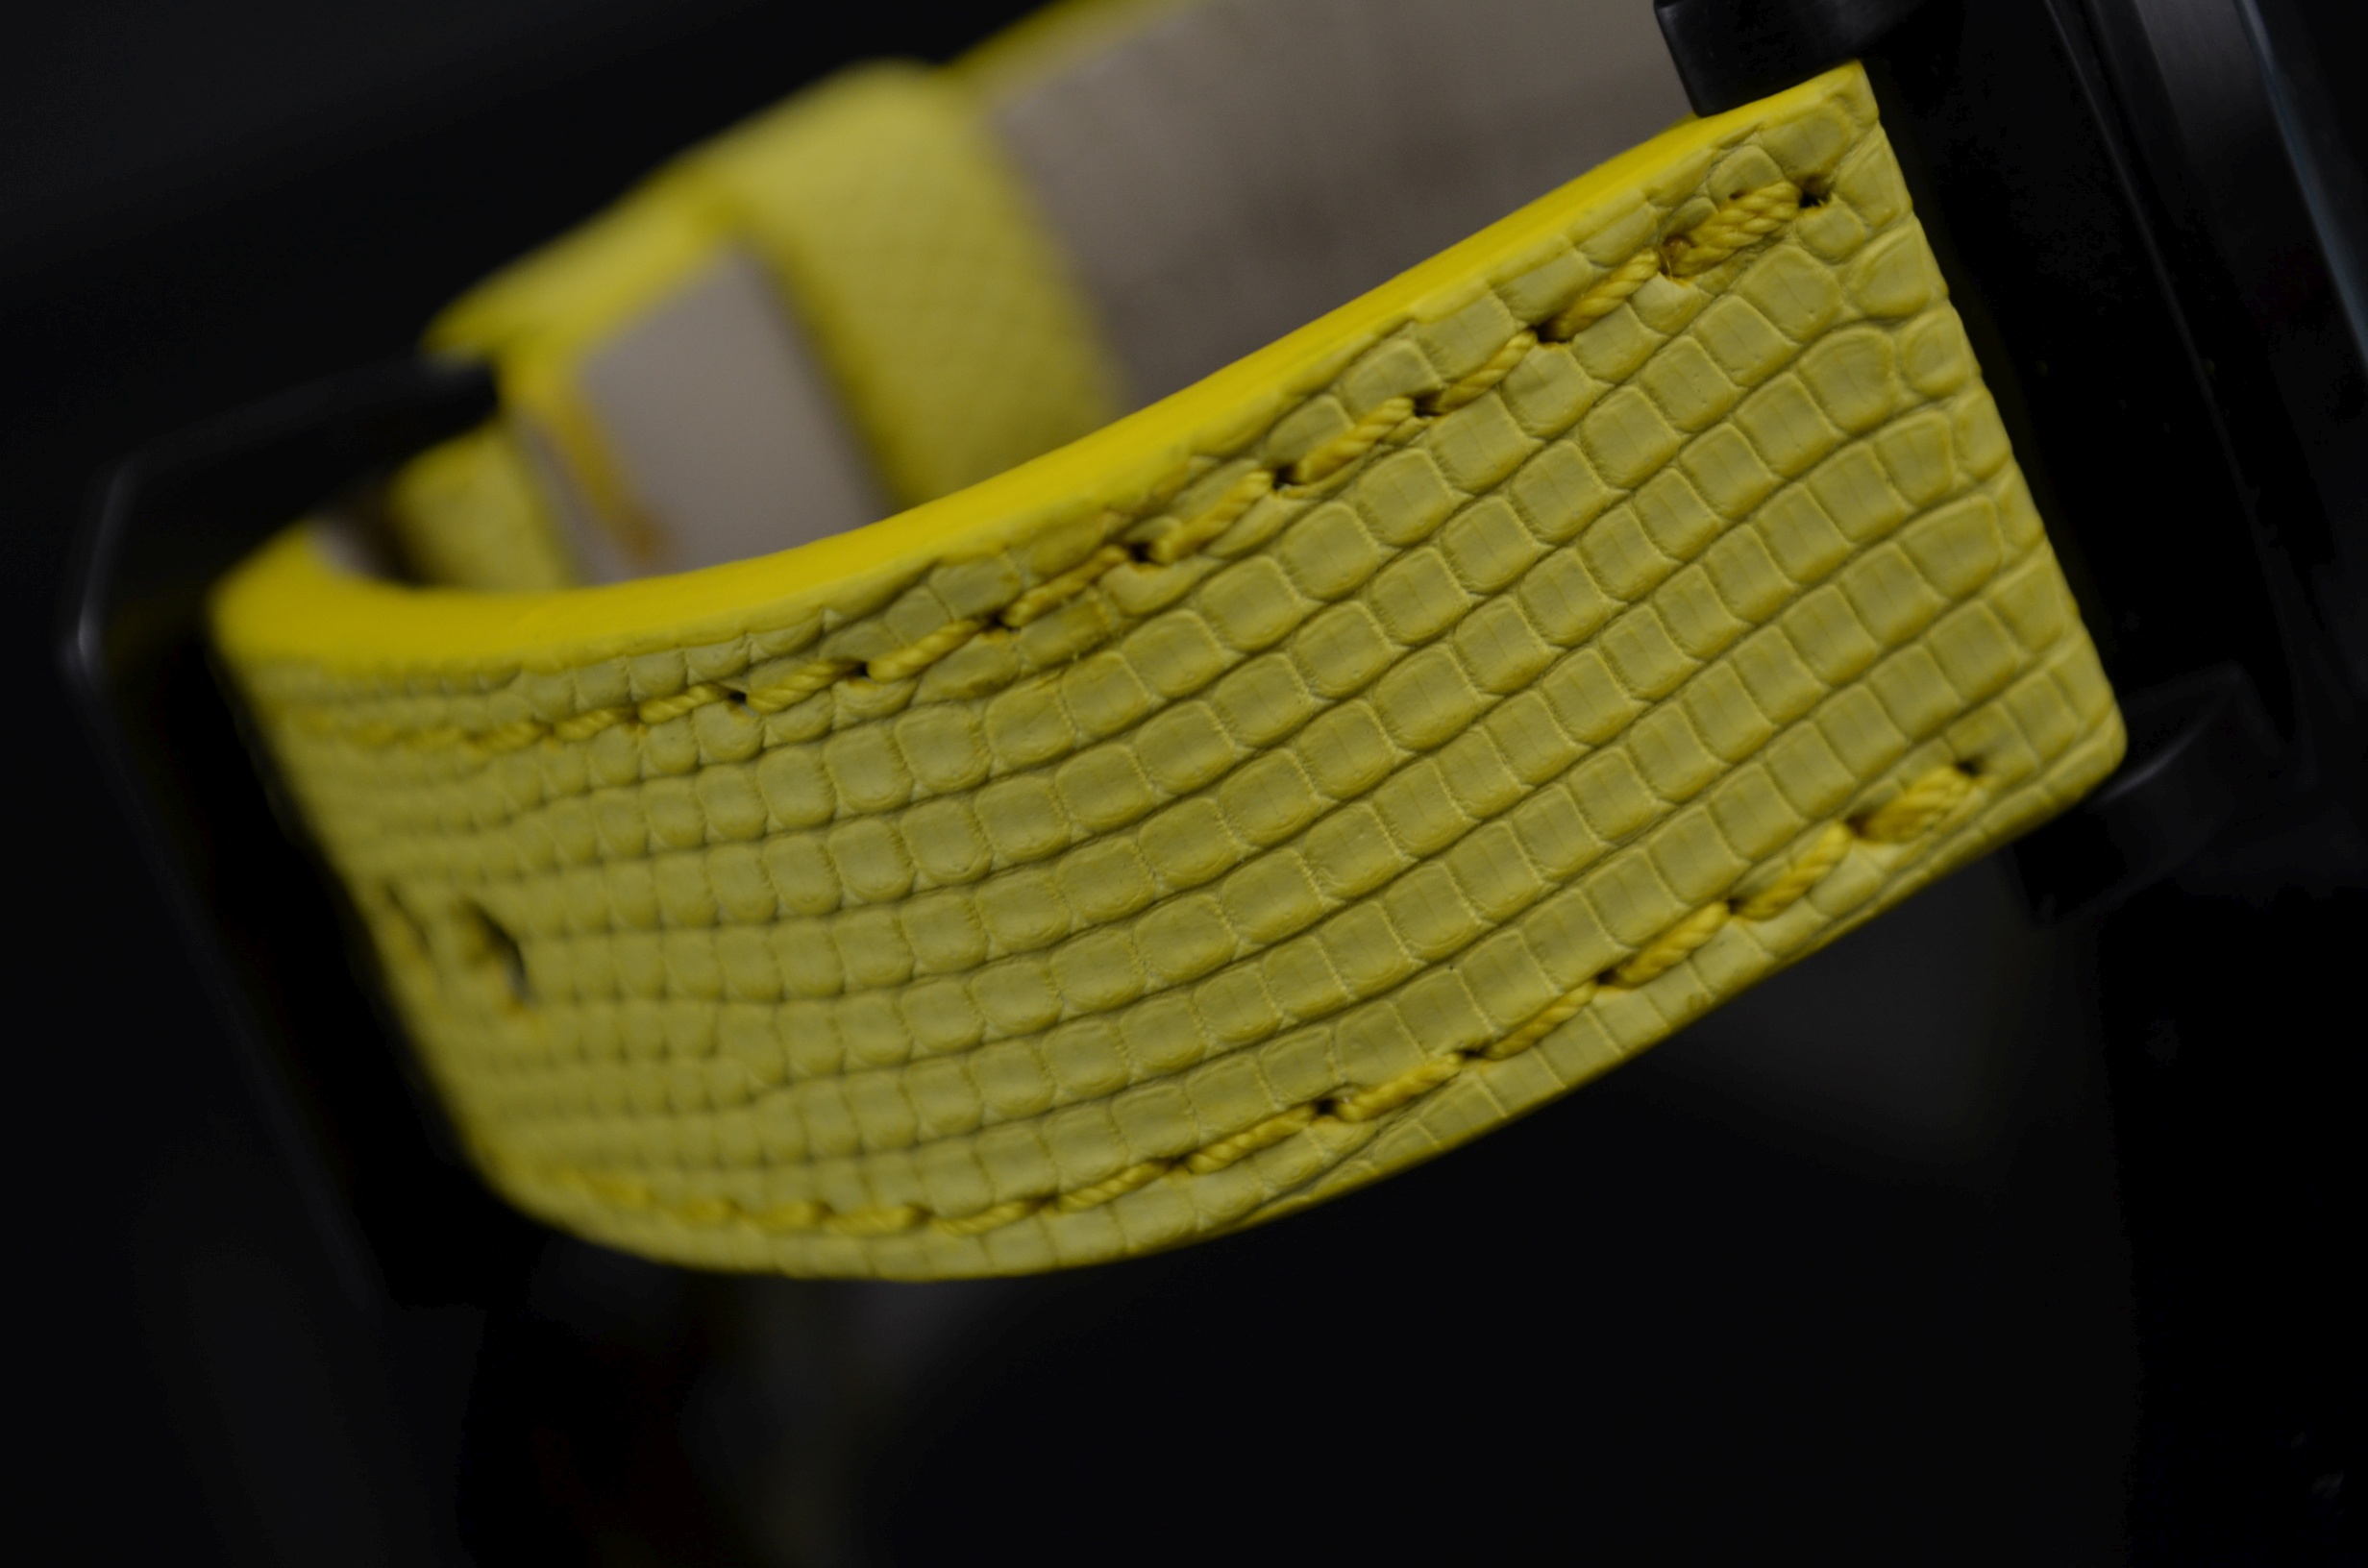 YELLOW MATTE is one of our hand crafted watch straps. Available in yellow color, 3.5 - 4 mm thick.